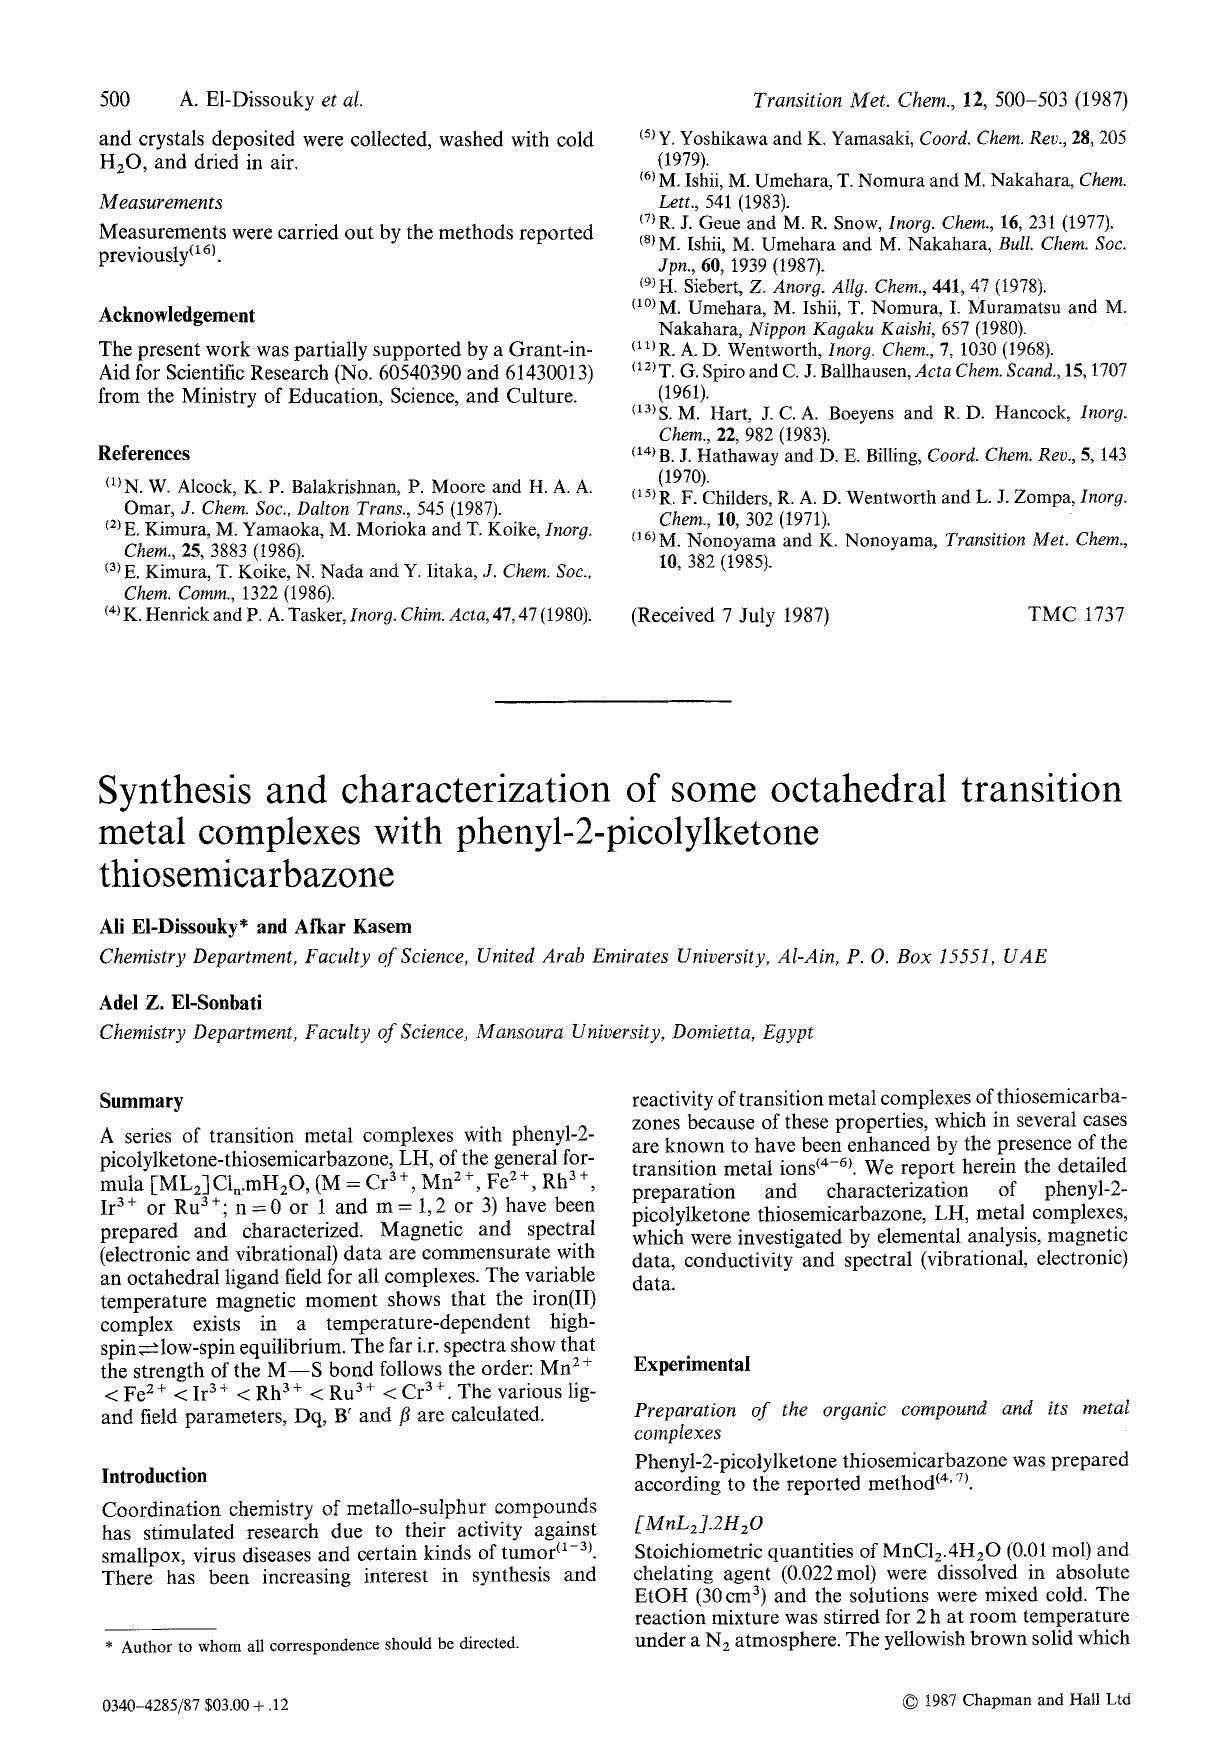 Synthesis and characterization of some octahedral transition metal complexes with phenyl-2-picolylketone thiosemicarbazone by Unknown